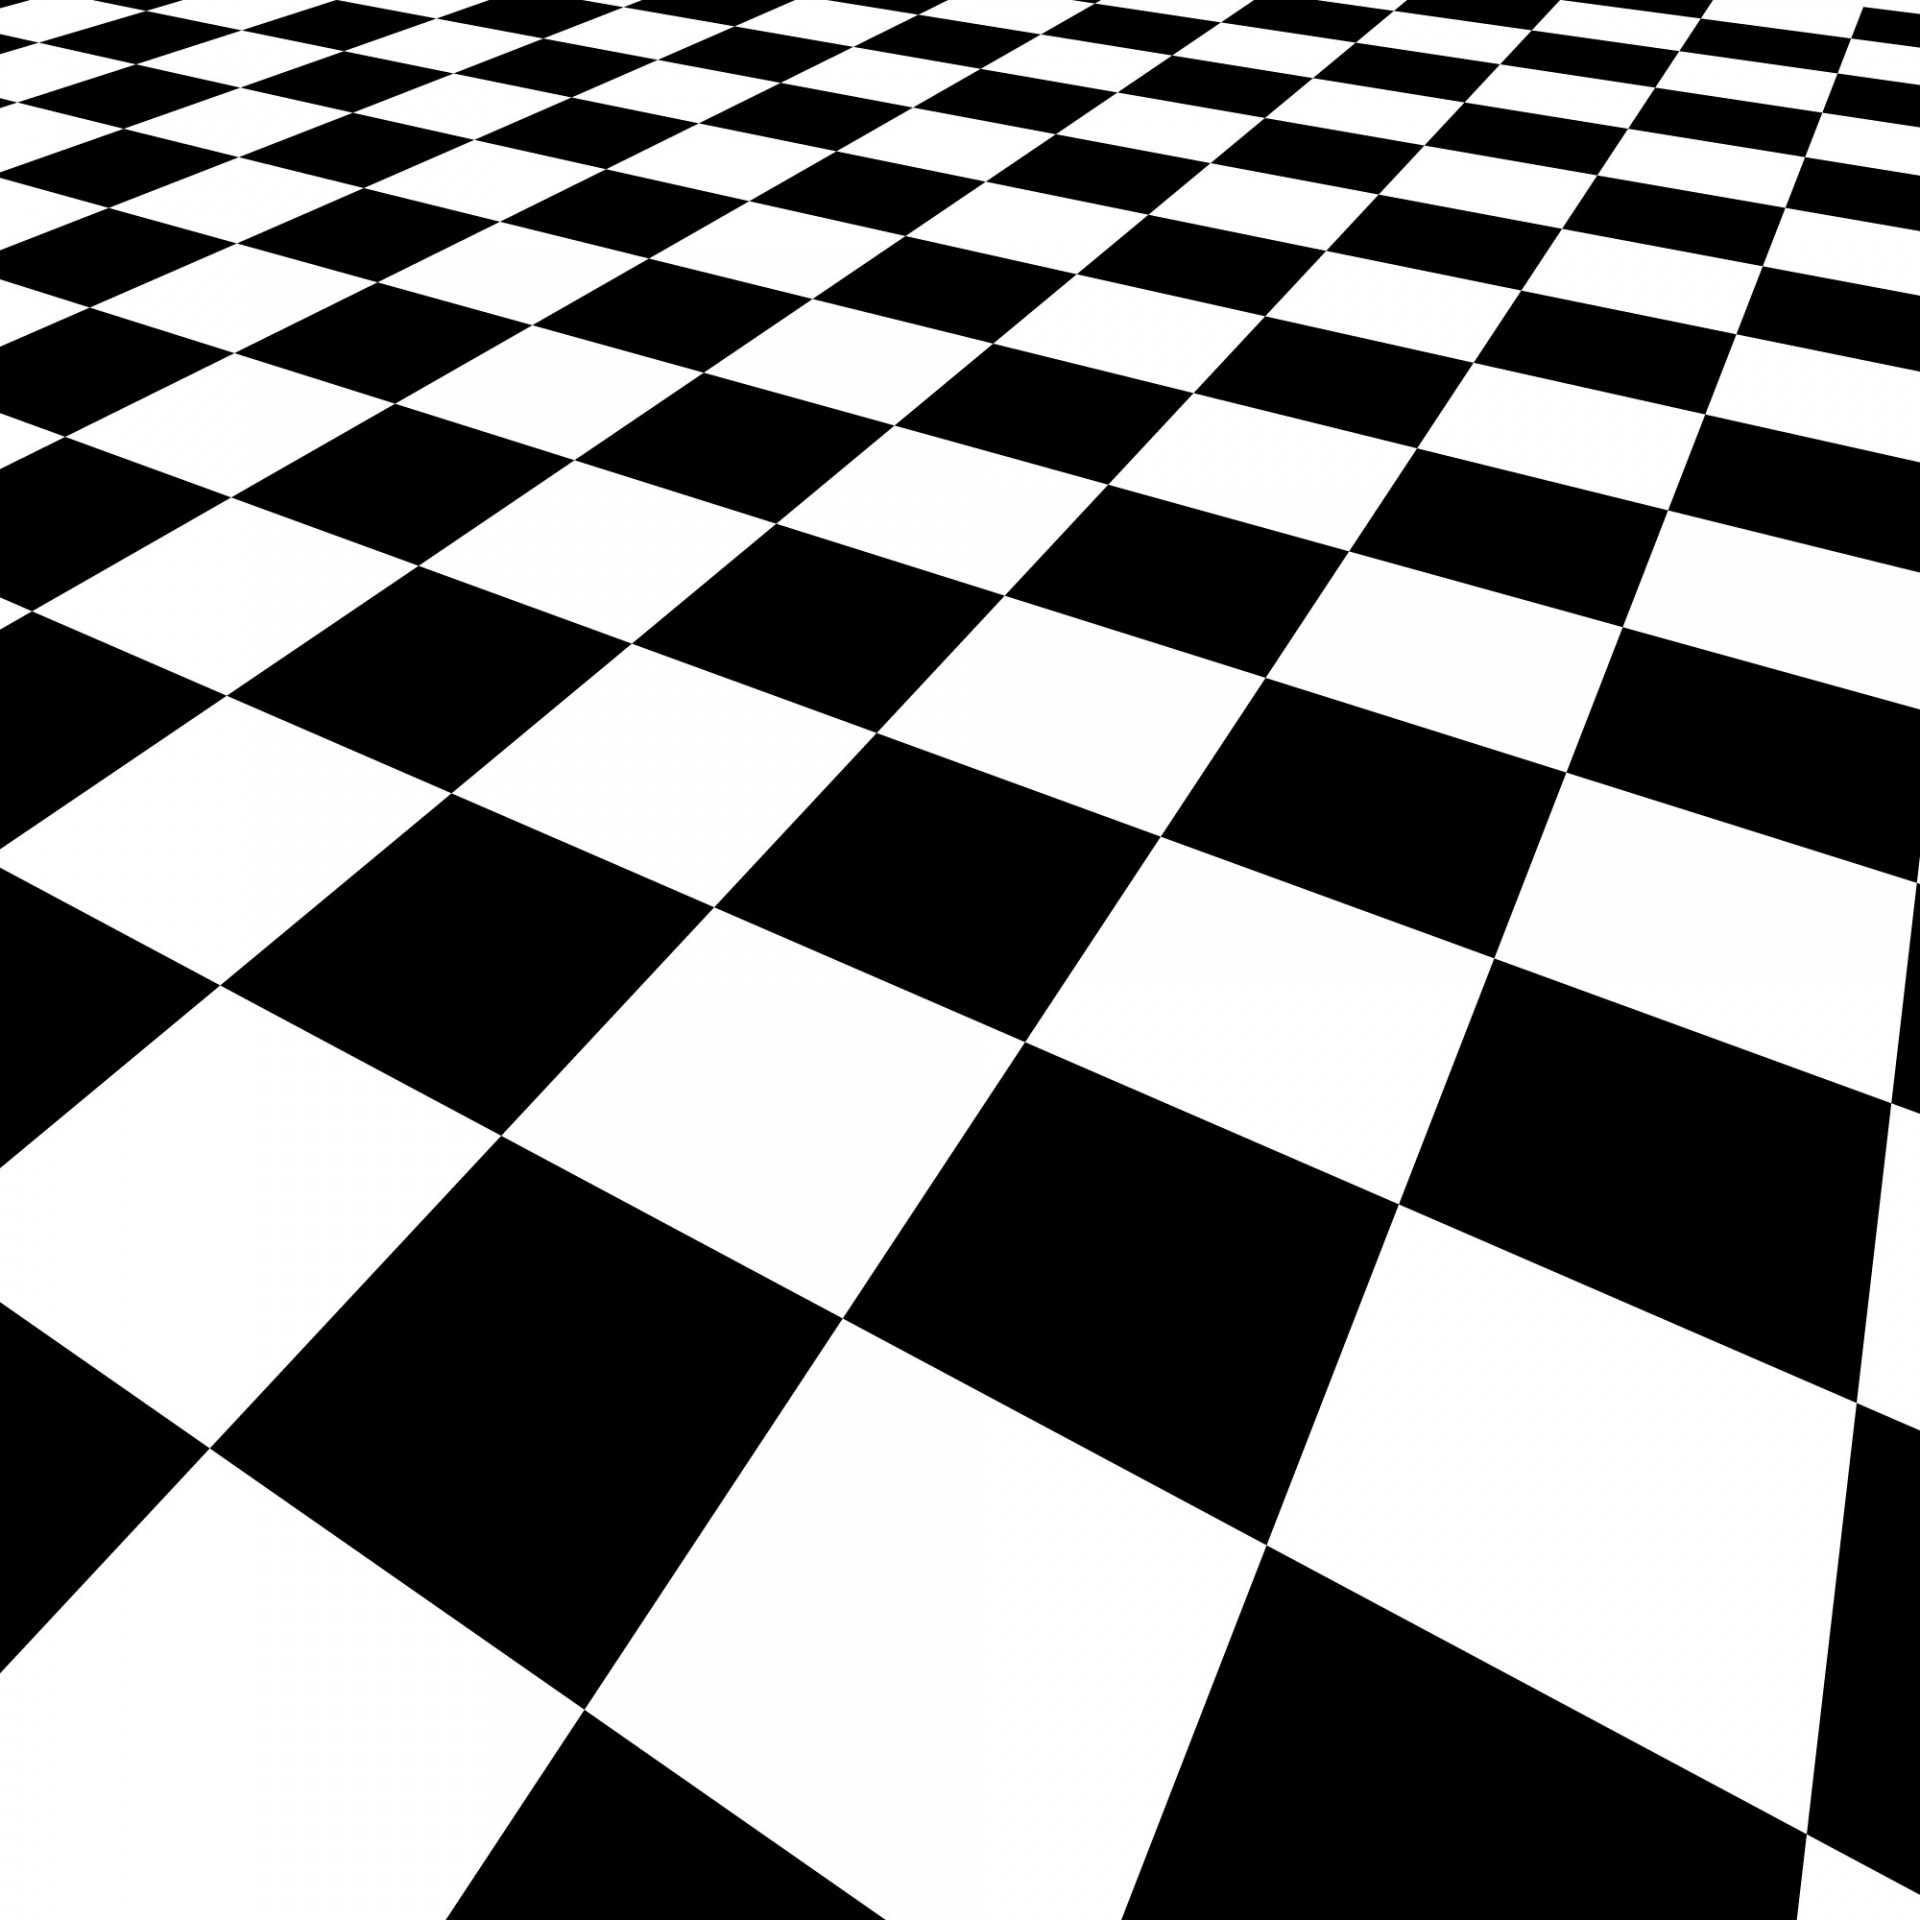 Download free photo of Black white,checkered,background,abstract,checkered  black and white image - from 